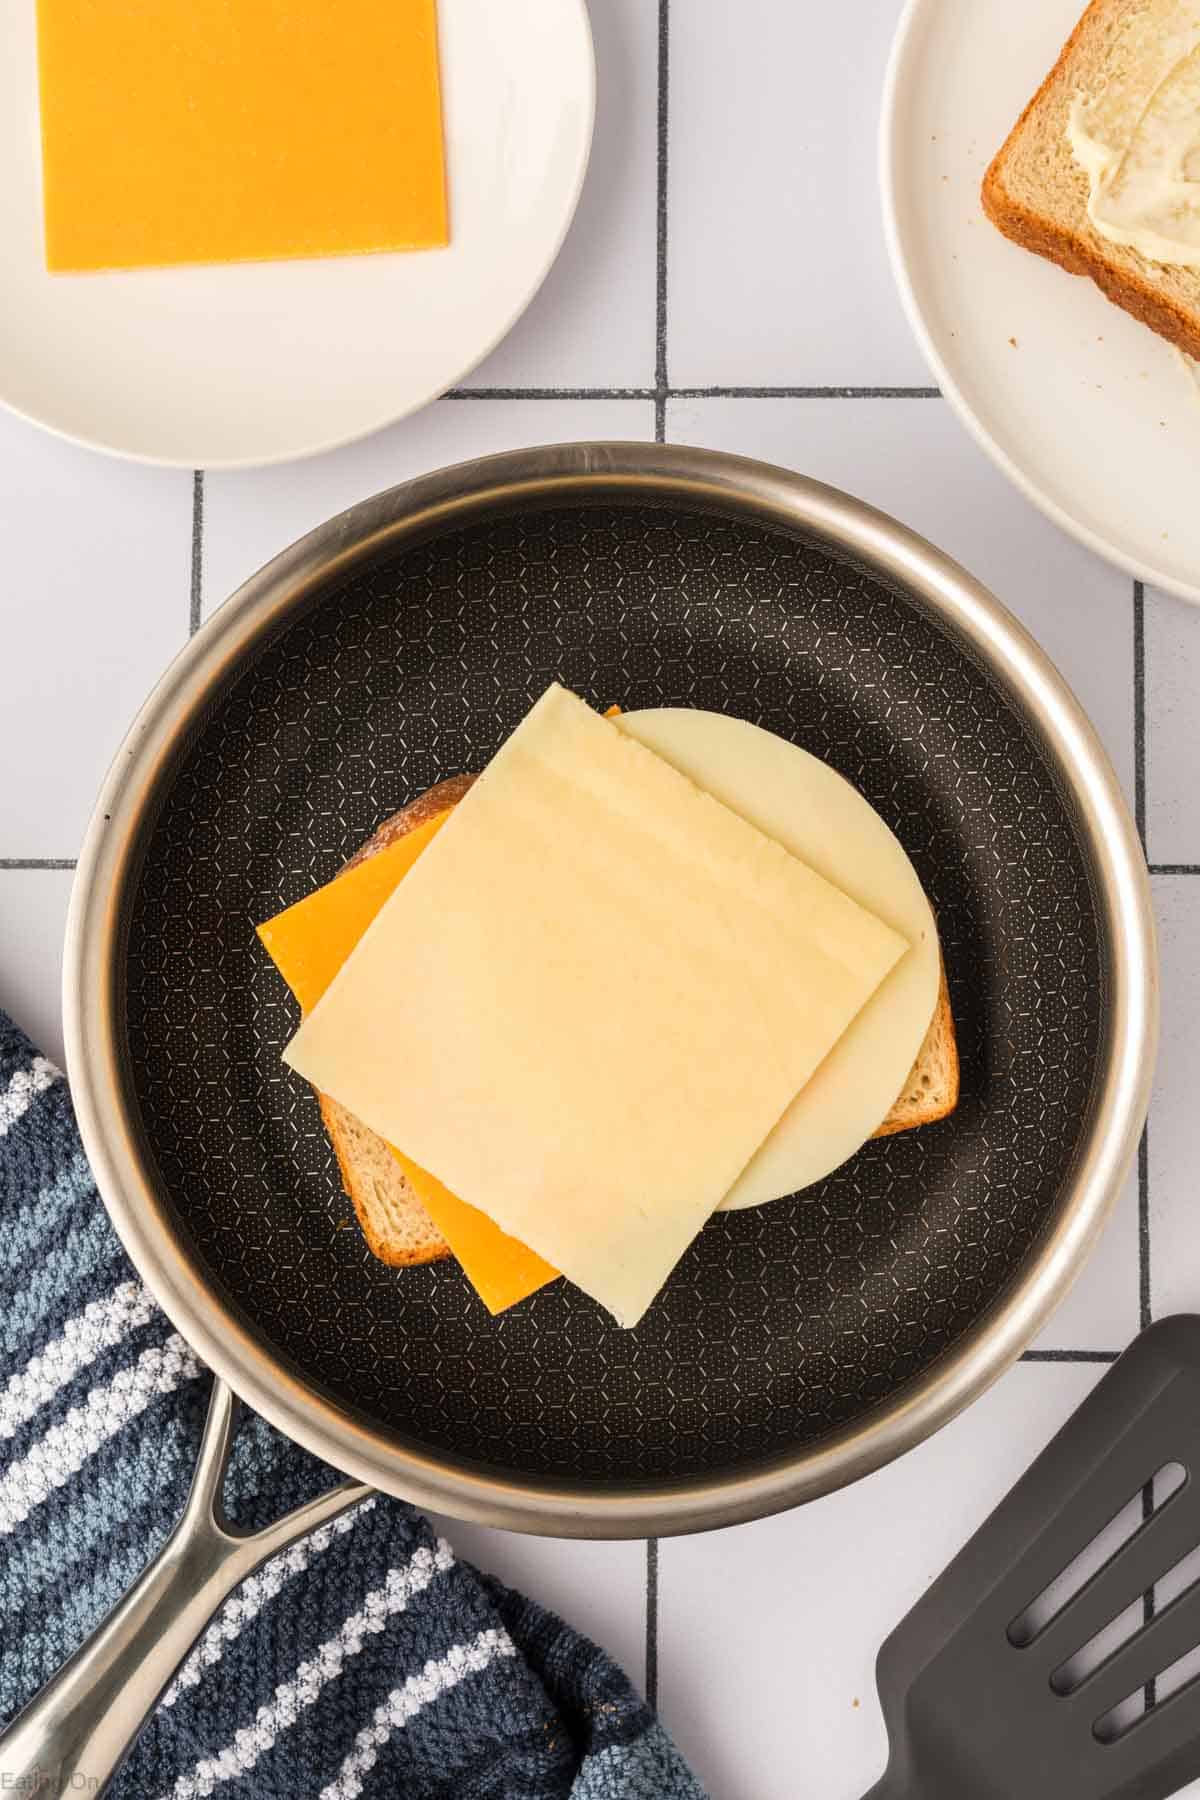 Topping the slice of bread with the three slices of cheeses